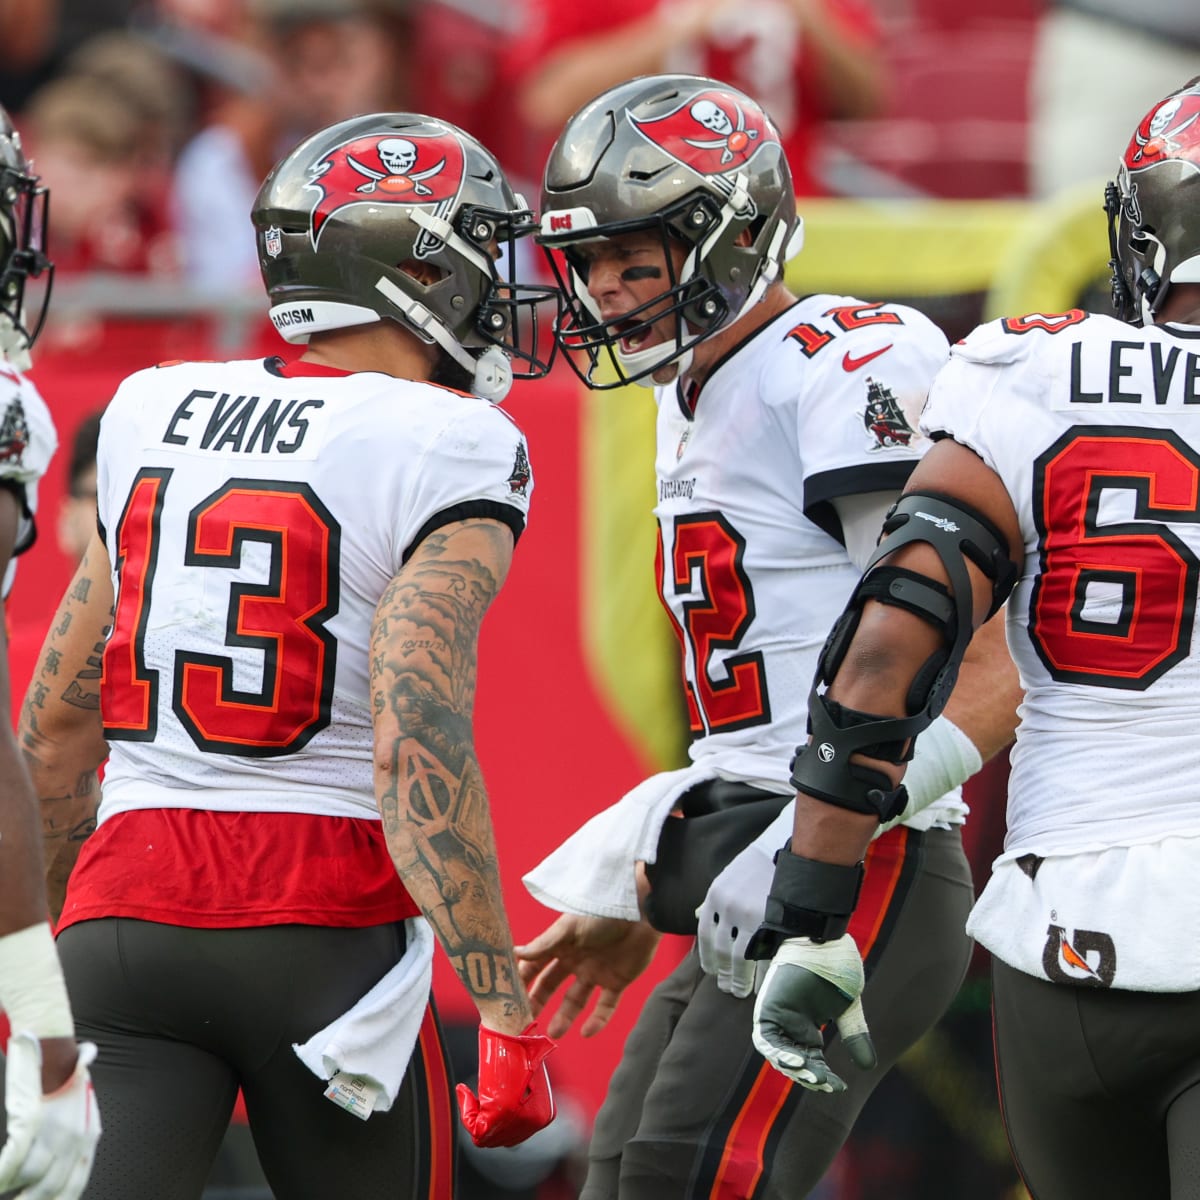 Bucs, wide receiver Mike Evans talking about third contract